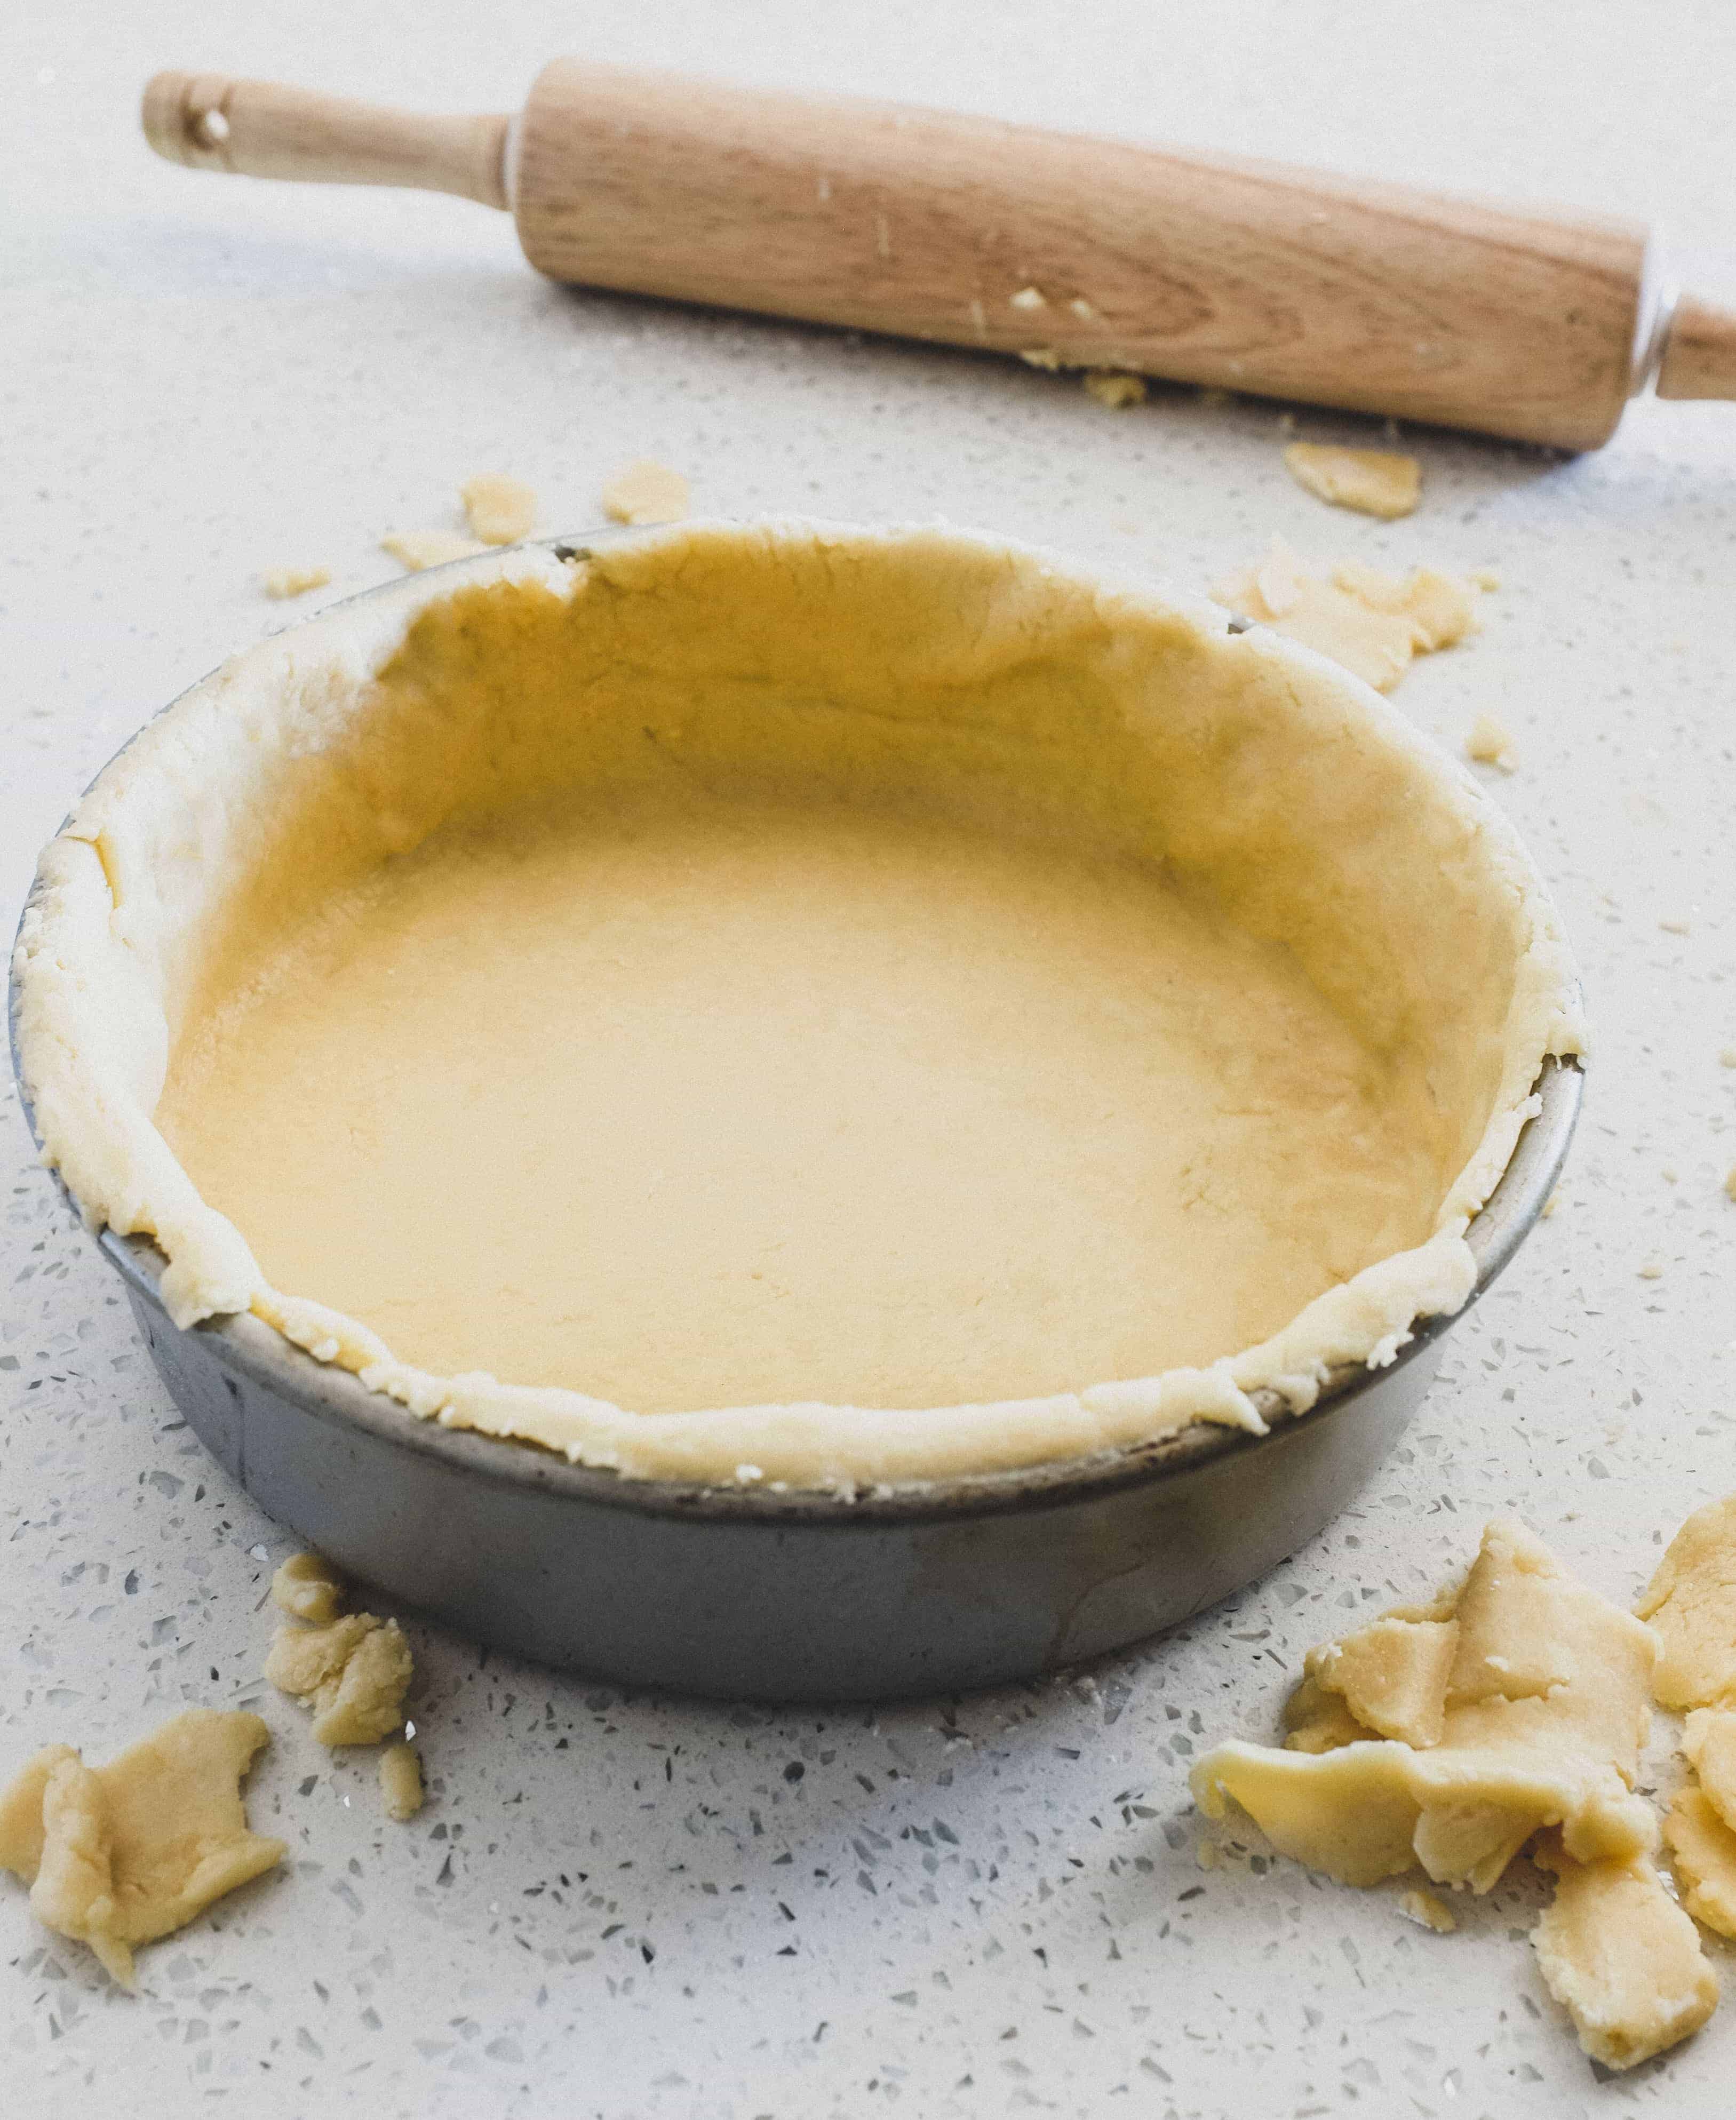 Sweet pastry dough in a baking tin for an Italian Ricotta Pie